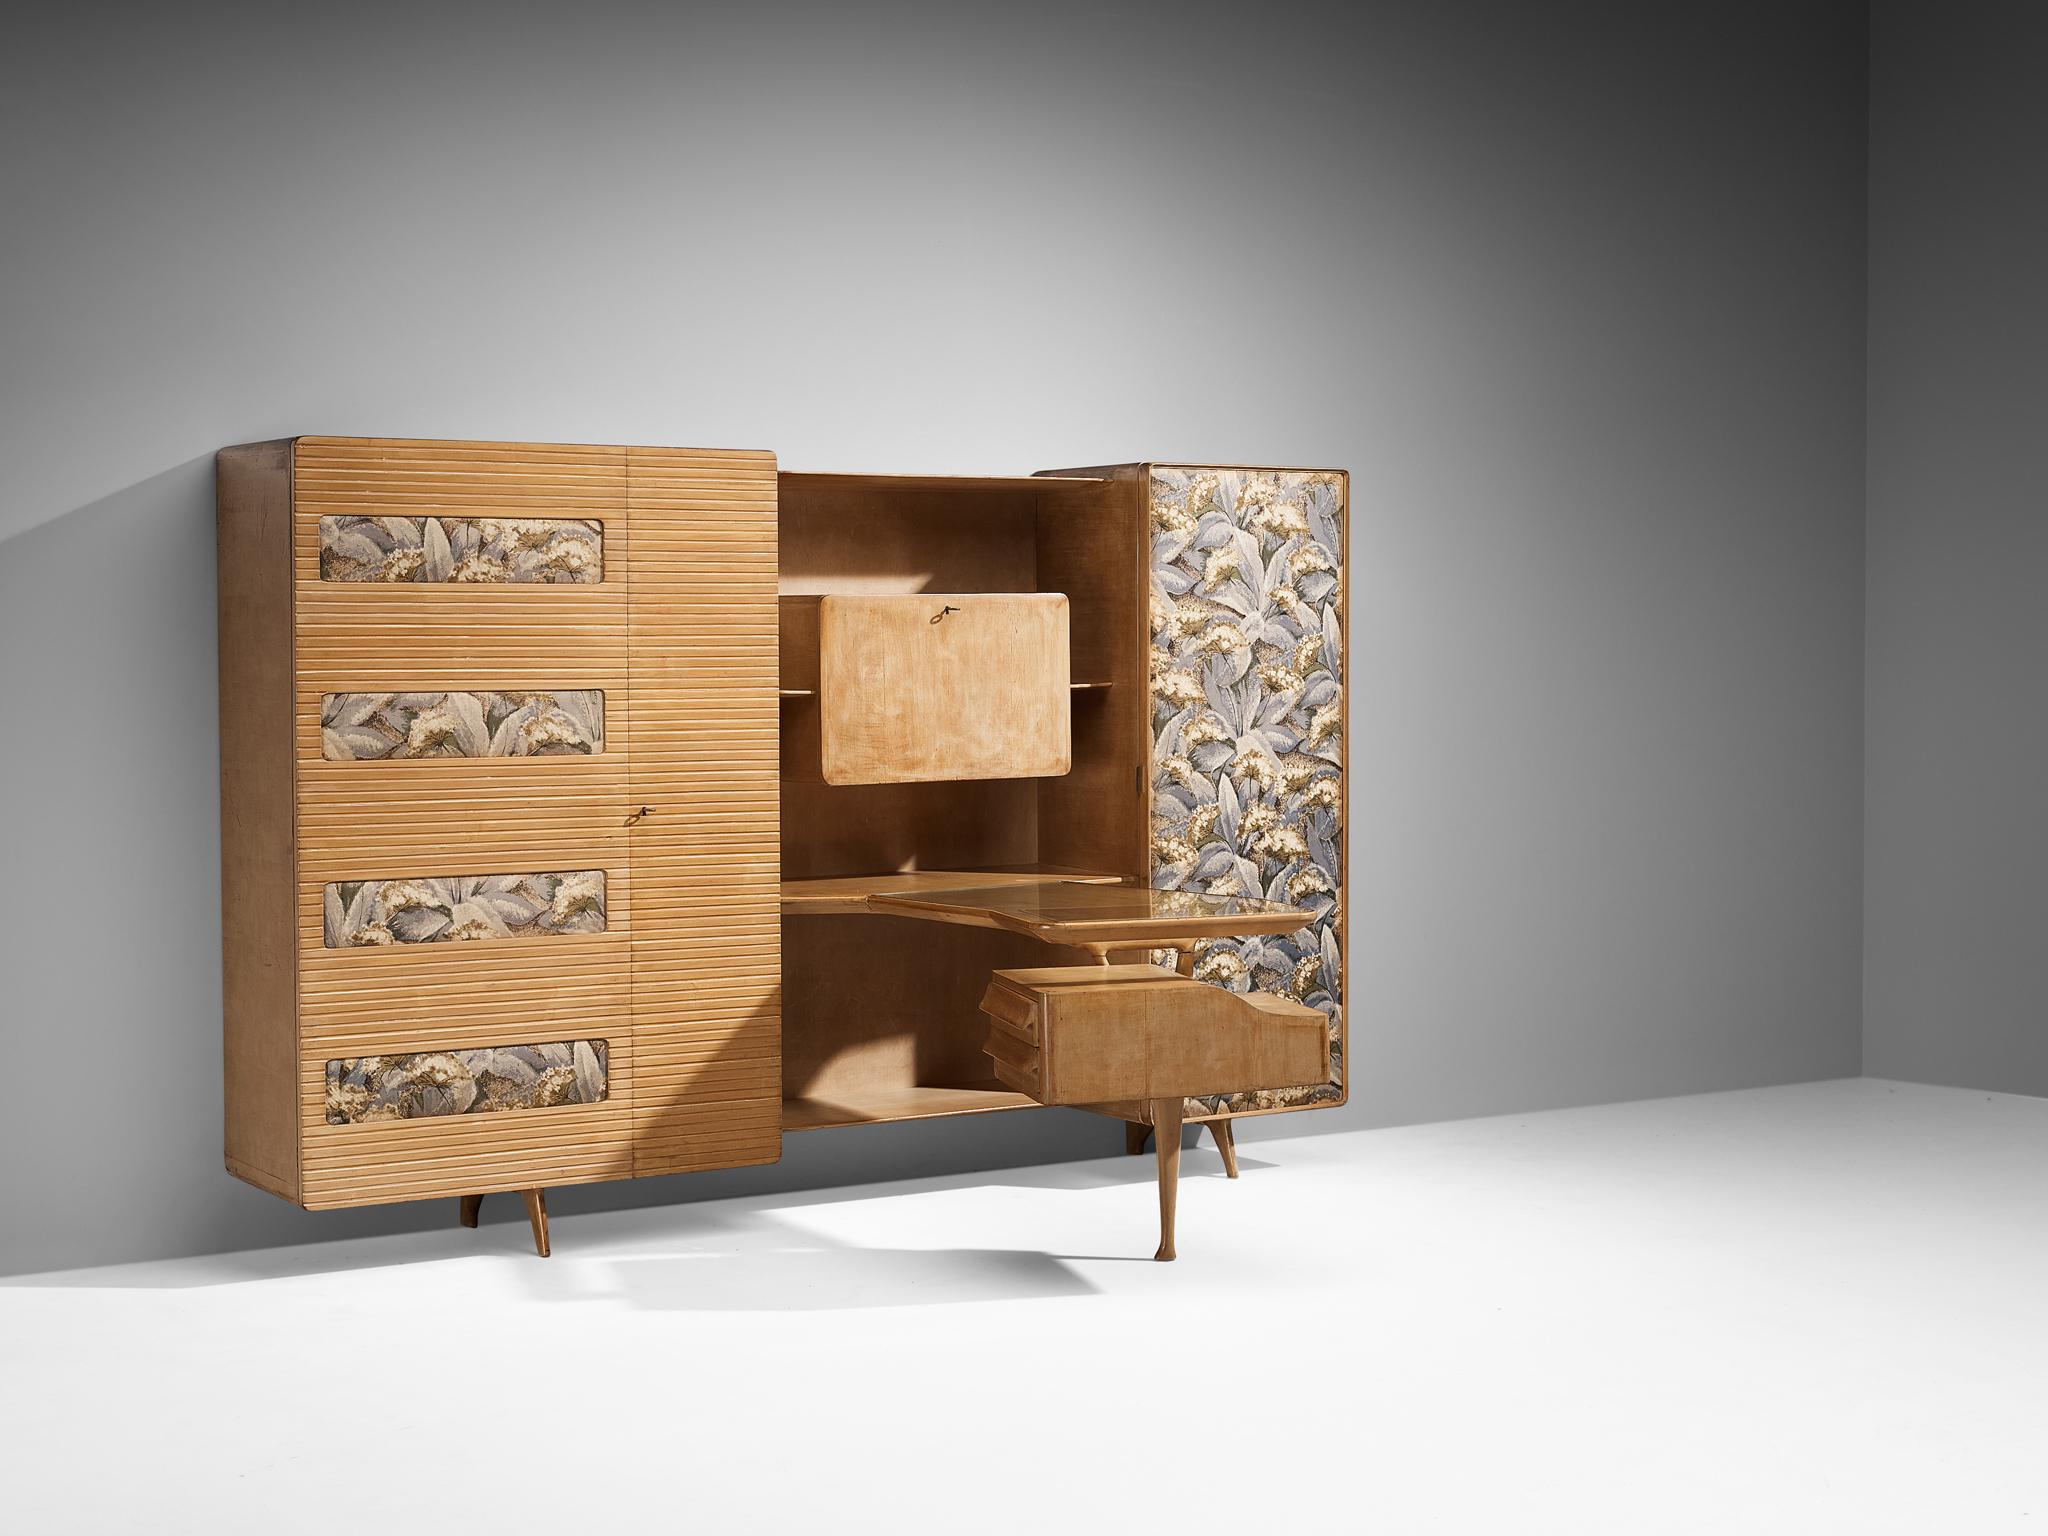 Wardrobe with writing desk, birch, maple, fabric, glass, brass, coated steel, Italy, 1950s

Hailing from a skilled artisan of Italy, this exceptional set embodies a unique combination of a wardrobe and writing desk, reflecting the design principles